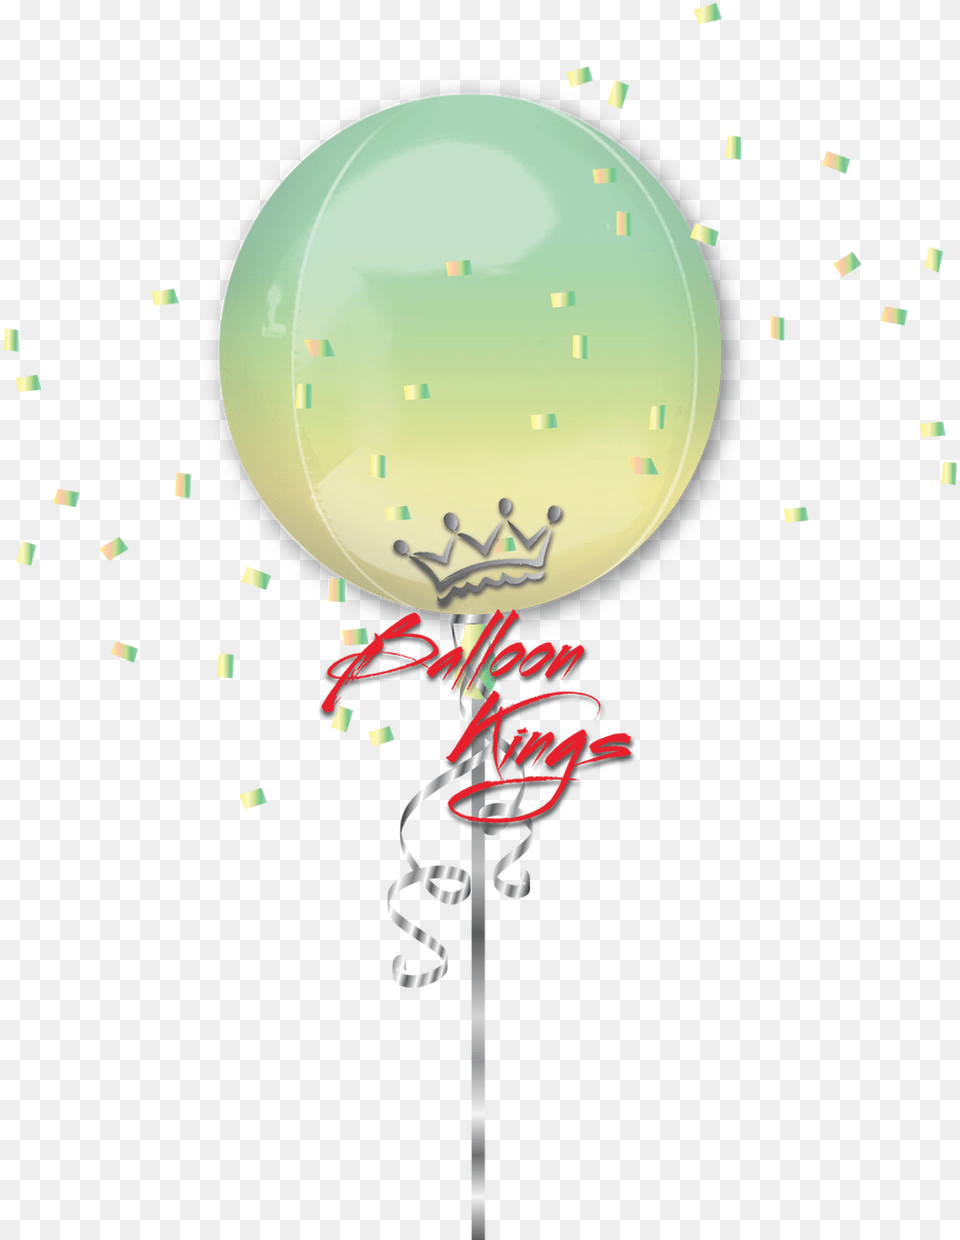 Orbz Ombre Yellow Amp Green Transparent Curious George Birthday, Balloon, Paper Png Image